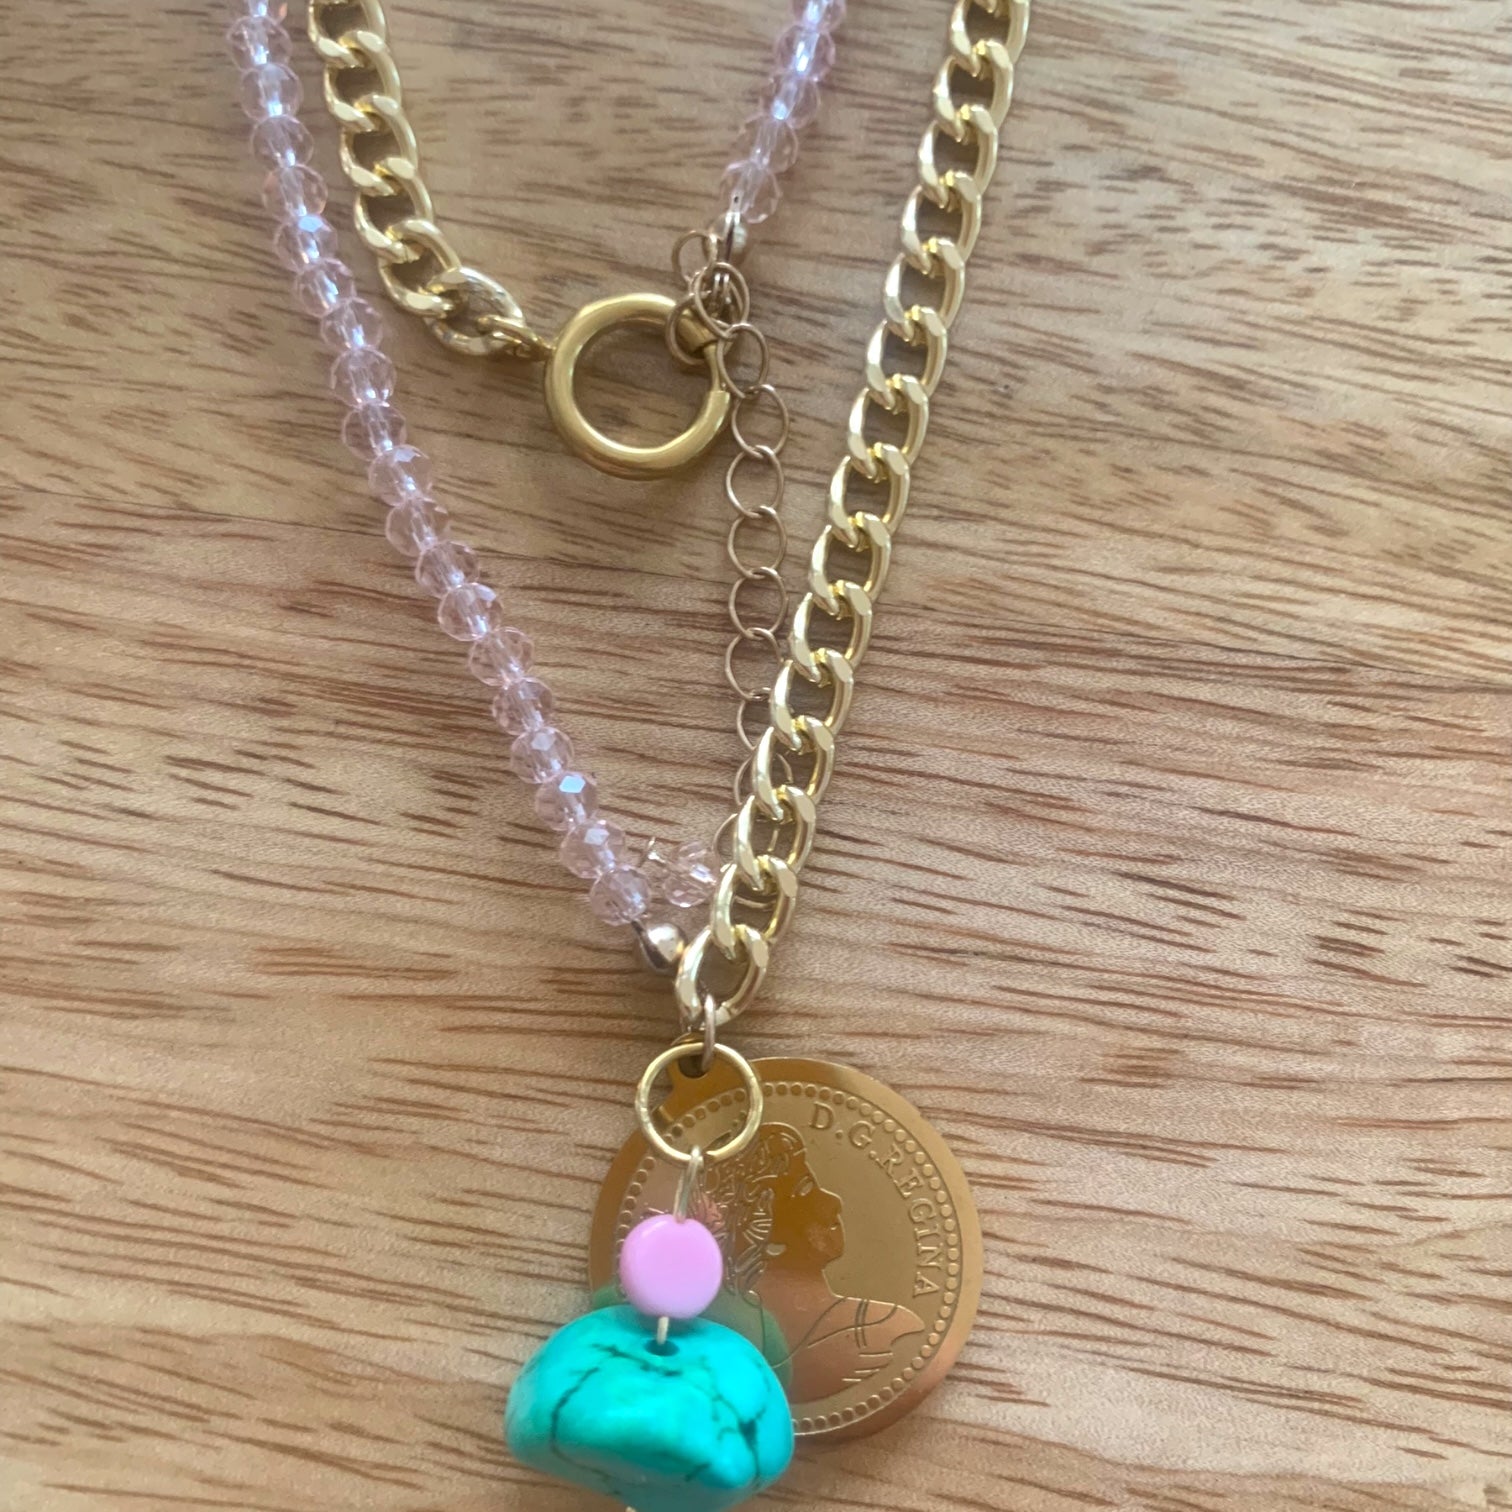 1 of 1 Bespoke Soft Pink, Turquoise and Gold Multiwear Statement Necklace-Necklace